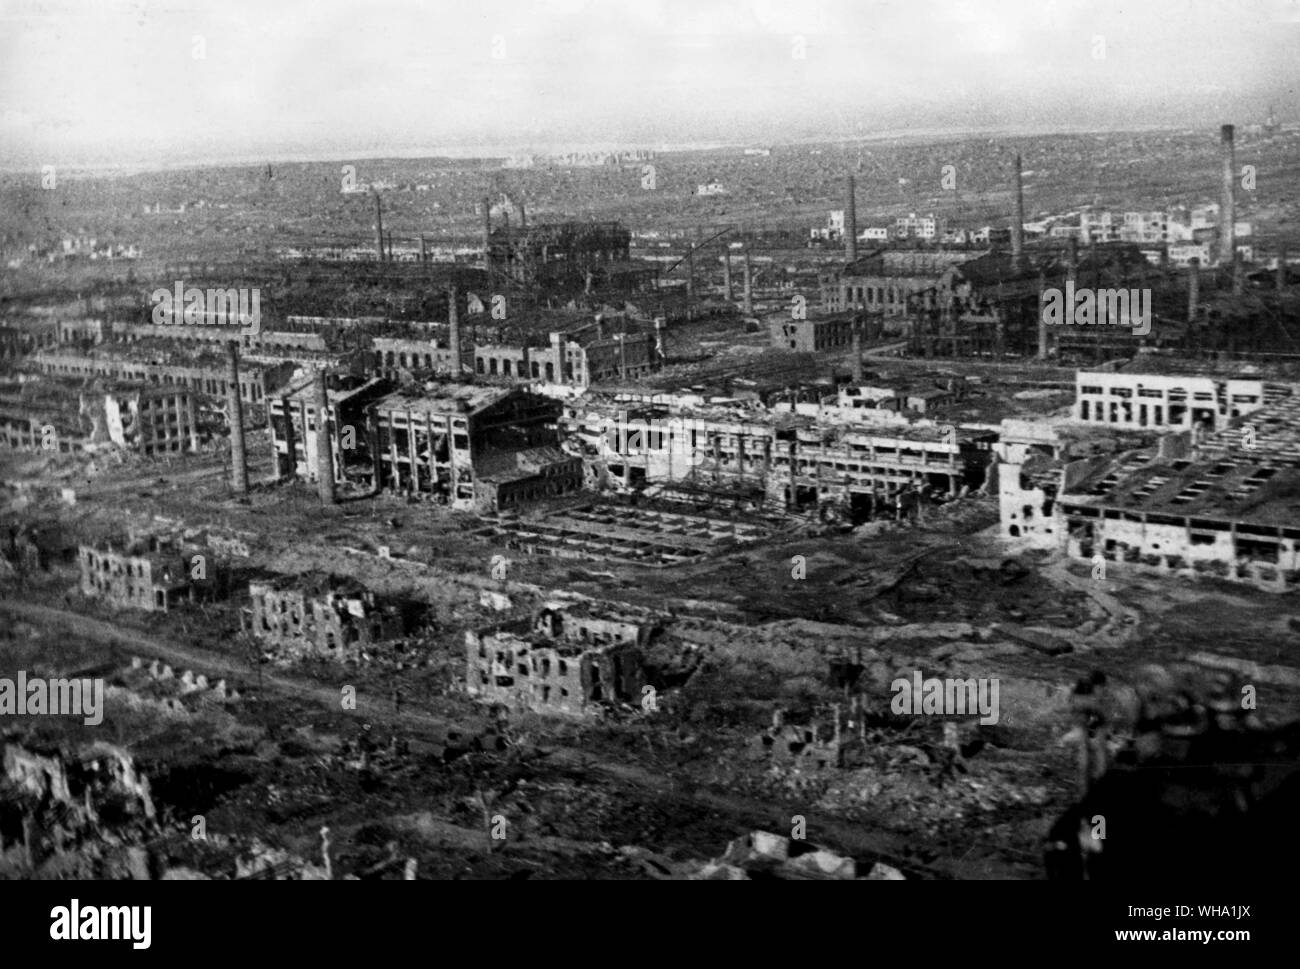 WW2: Russia/ The Great Patriotic War, 1941-45. Stalingrad. View of the factory district from the air. 1943. Stock Photo